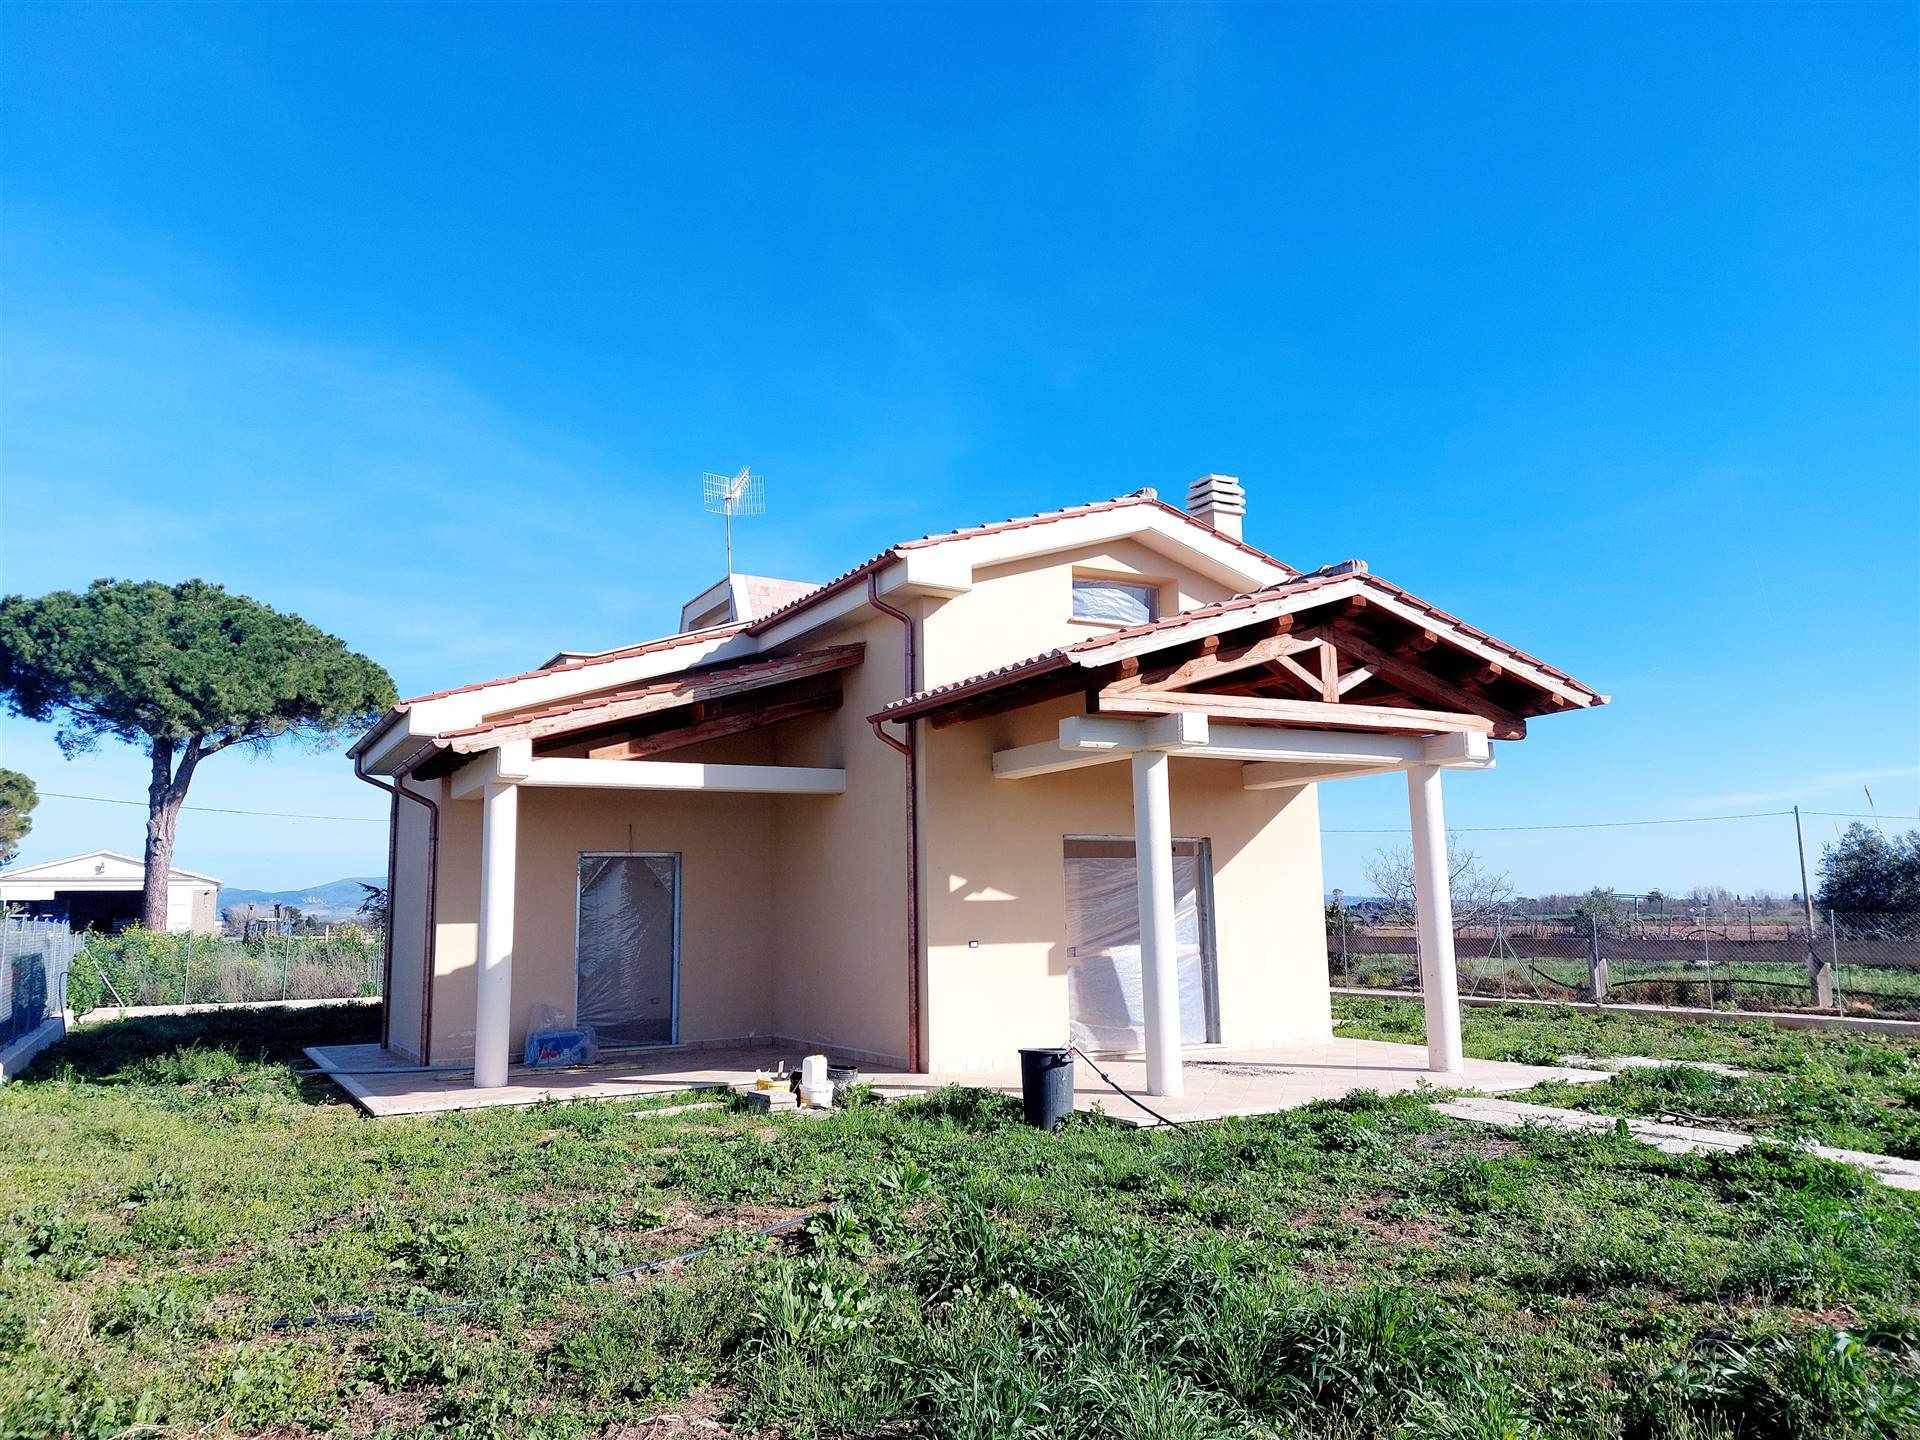 SALINE, TARQUINIA, Villa for sale of 140 Sq. mt., New construction, Heating Individual heating system, Energetic class: A4, composed by: 5 Rooms, Separate kitchen, , 3 Bedrooms, 2 Bathrooms, Price: € 